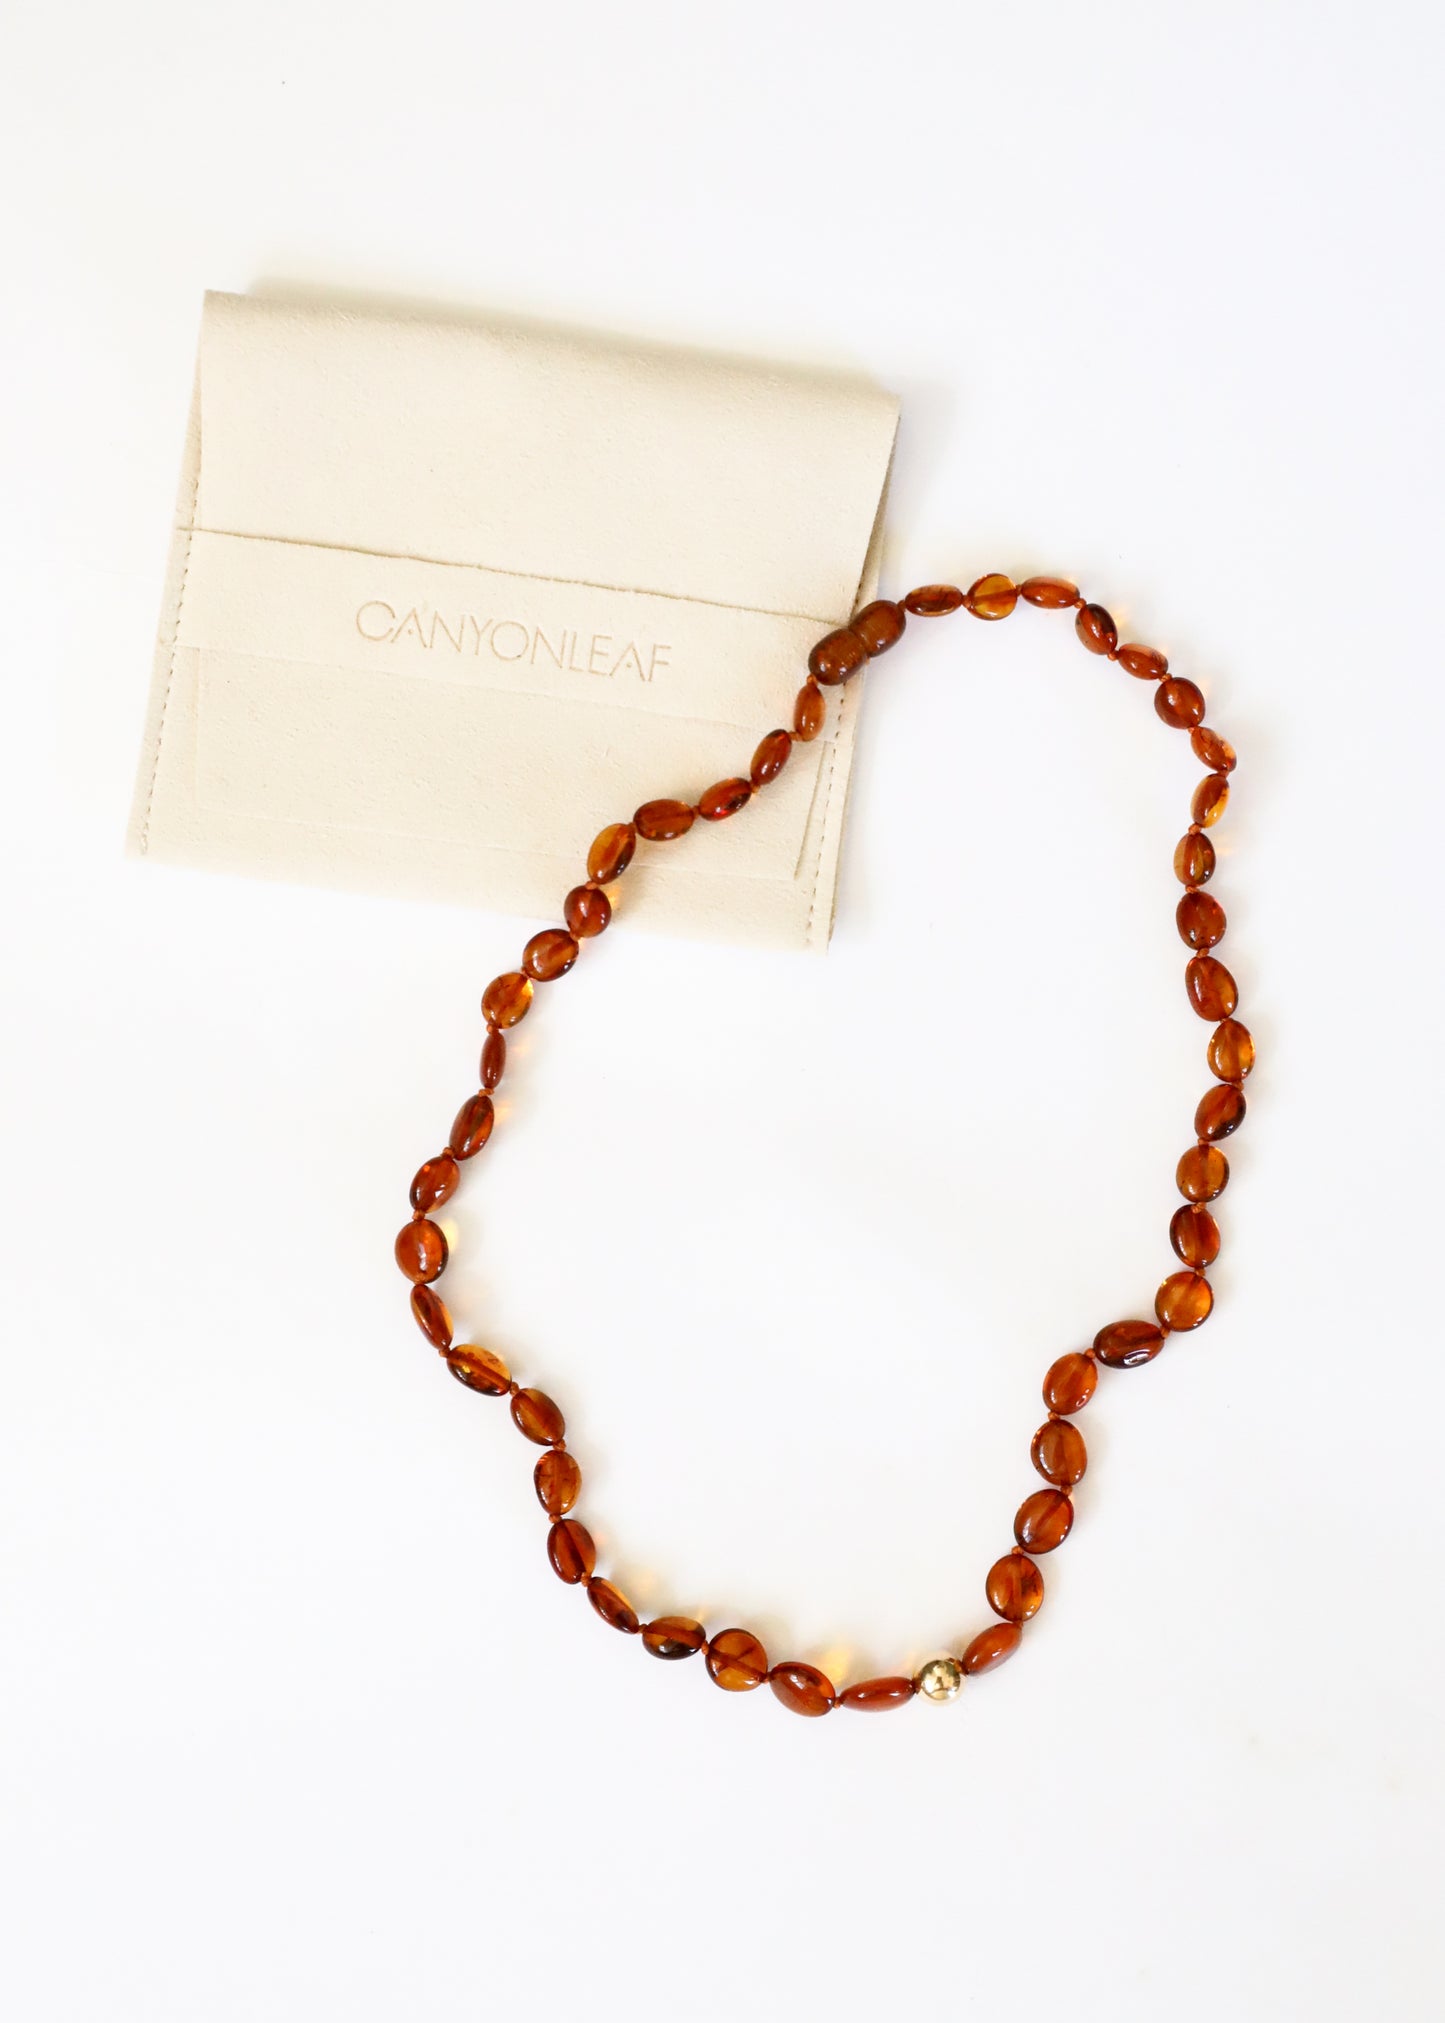 Polished Cognac Baltic Amber + Gold || Necklace